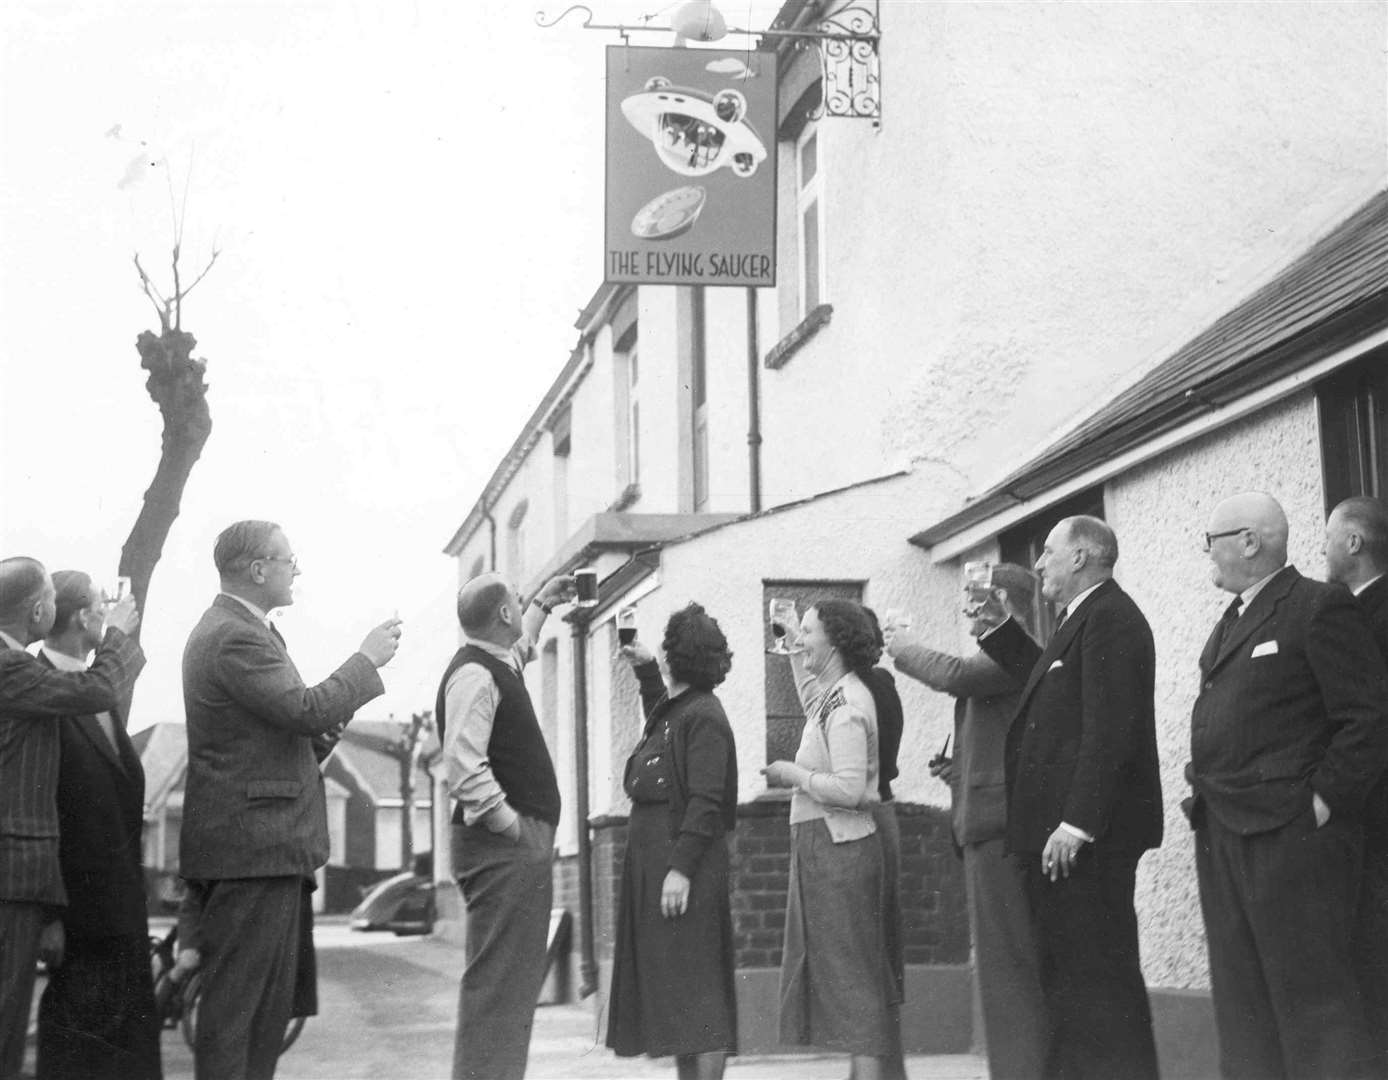 The opening ceremony of The Flying Saucer pub in Hempstead in April 1951. It is still open today and is owned by Greene King